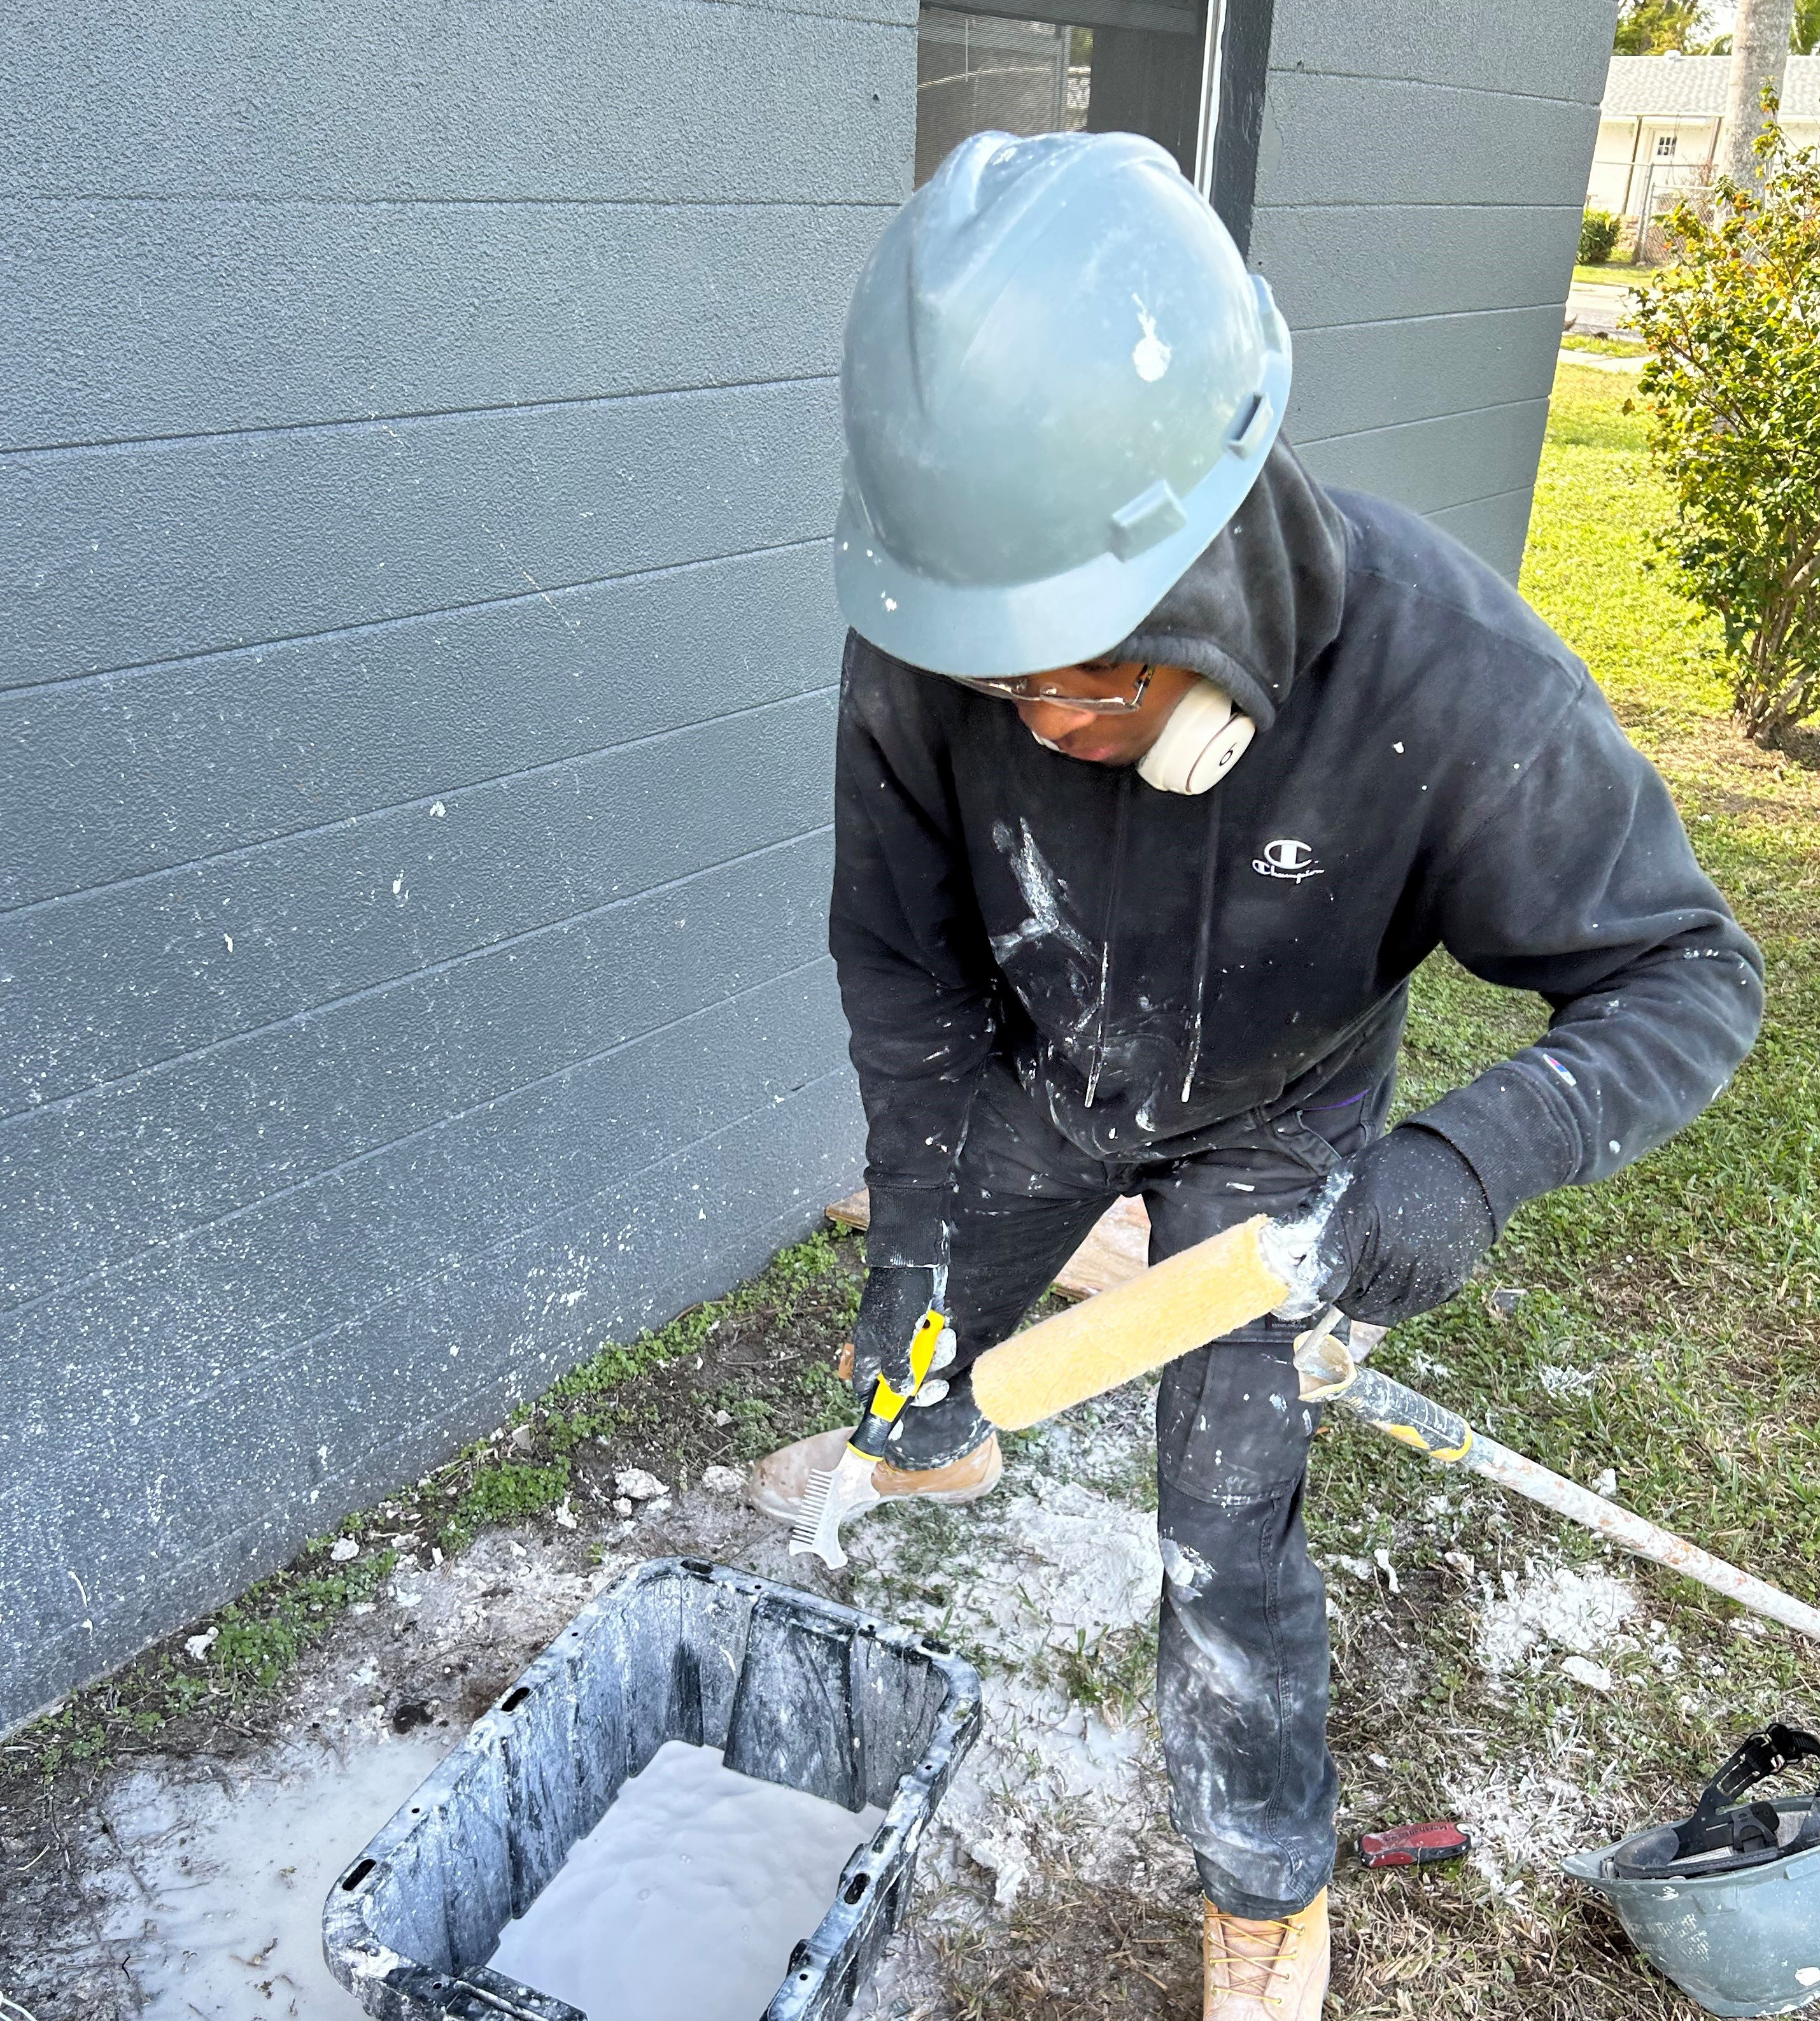 A student works on a jobsite